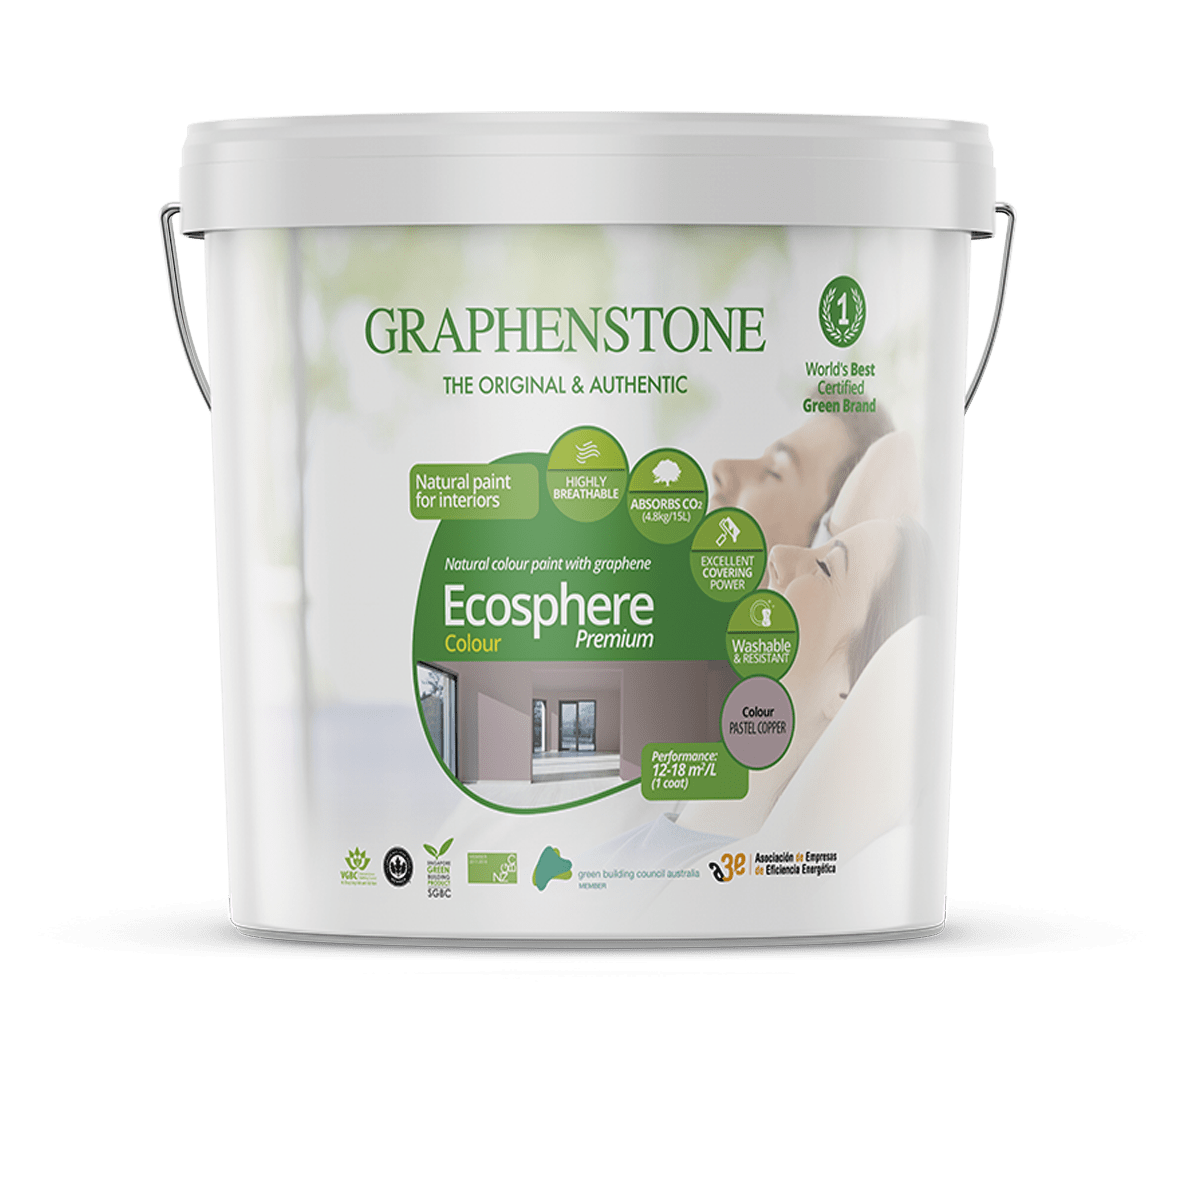 Ecosphere Colour – The highest quality natural lime paint for Interiors, highly breathable paint, absorbs CO2*, in White and 14 pastel colours